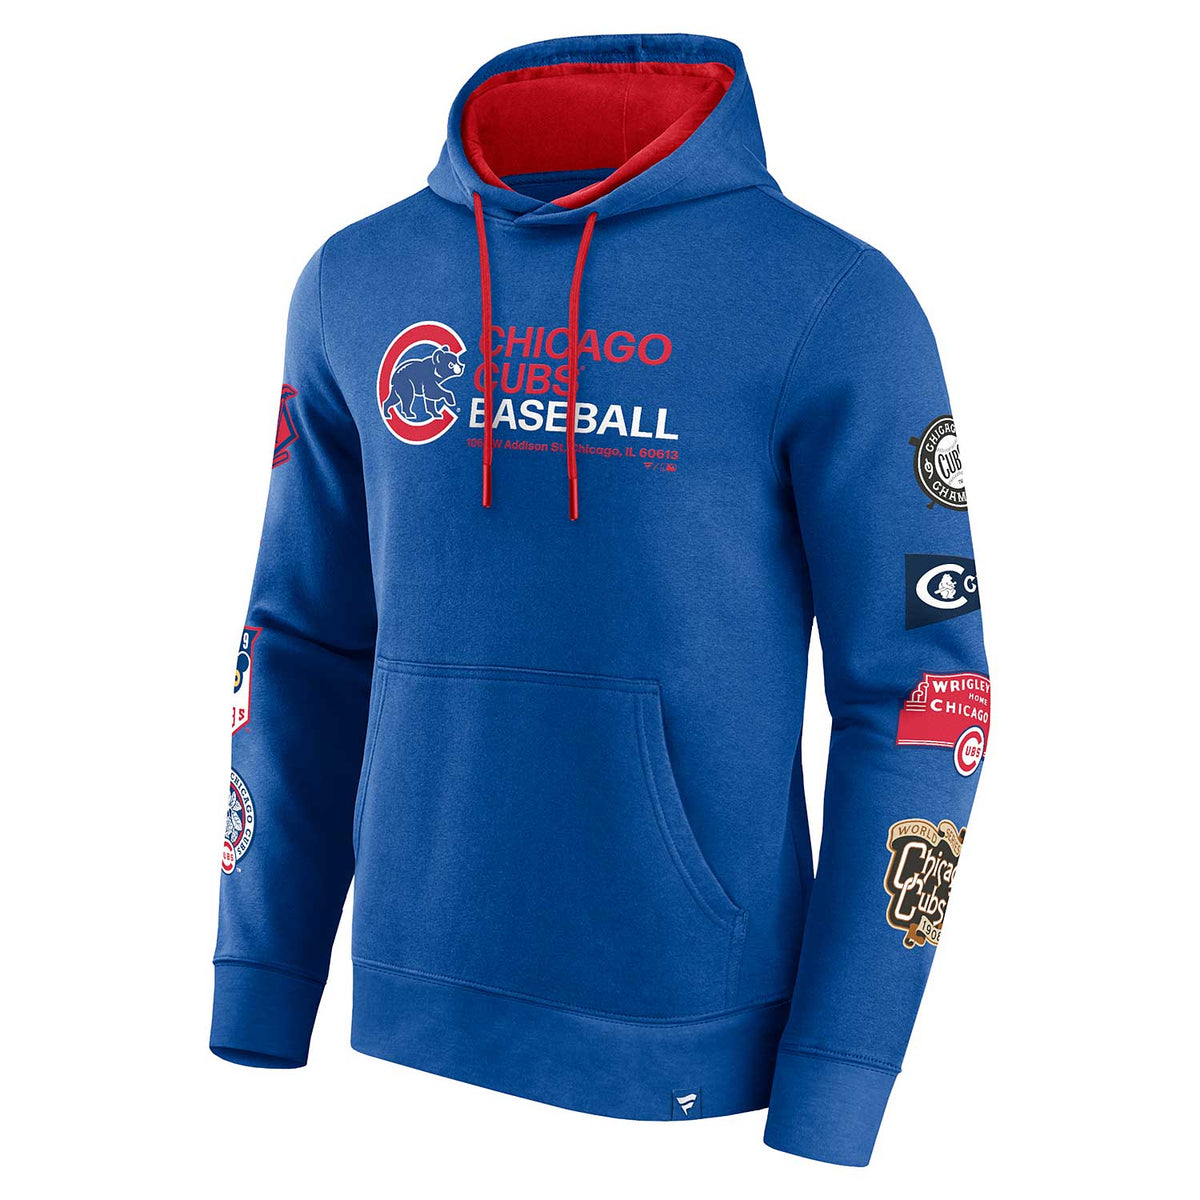 Antigua Chicago Cubs Precise 1969 Cooperstown Hooded Sweatshirt Small